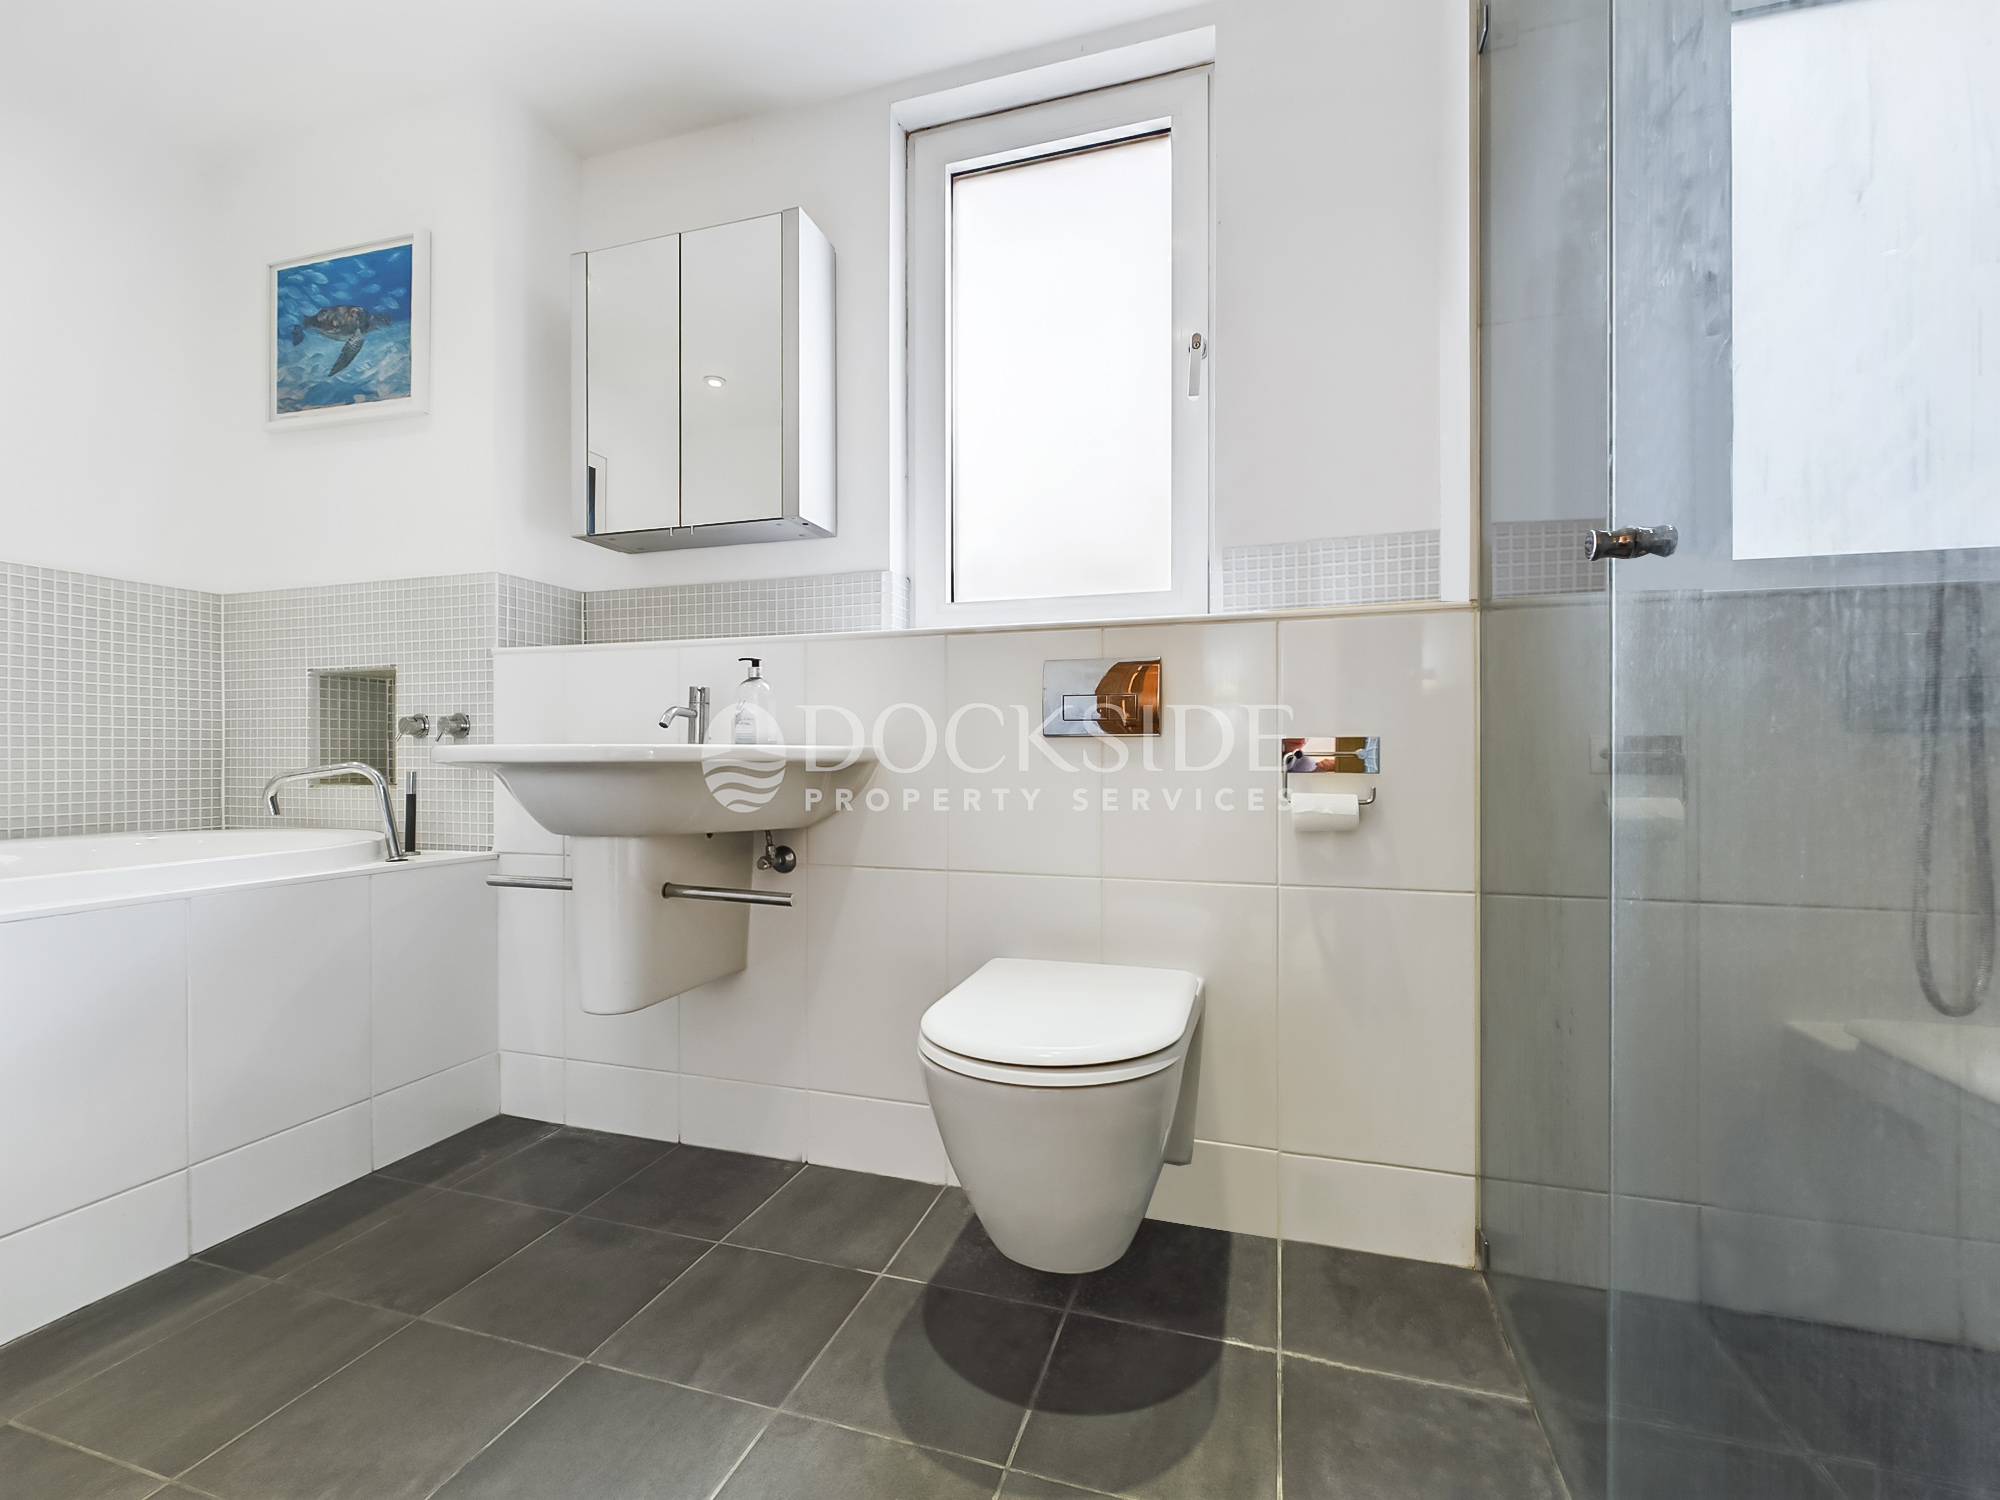 4 bed to rent in Pier Road, Gillingham  - Property Image 4